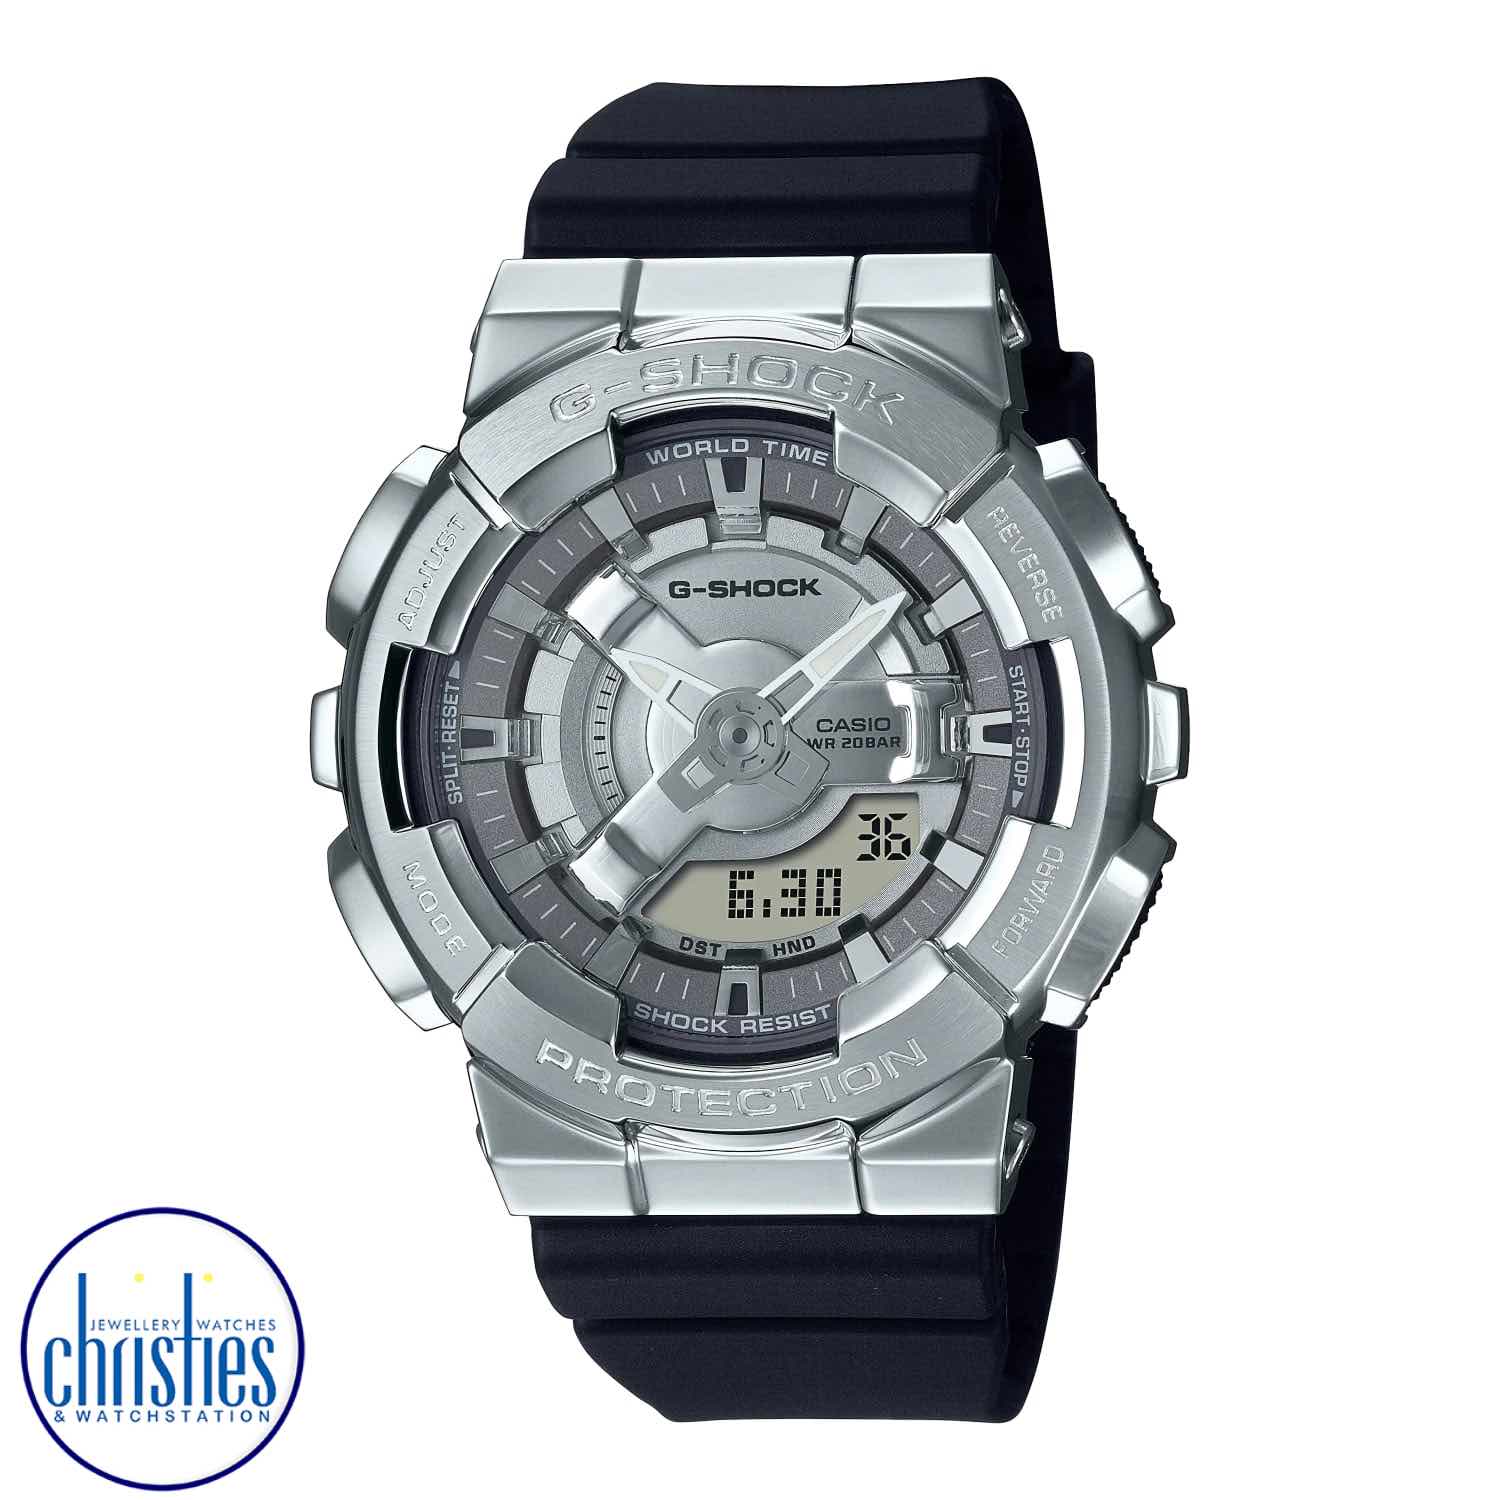 GM-S110-1A G-Shock ANA-DIGI  Watch. Go metal-clad in total comfort — with the popular GM-110 analog-digital combination G-SHOCK, now in an even slimmer, more compact construction. Baby-G watches price